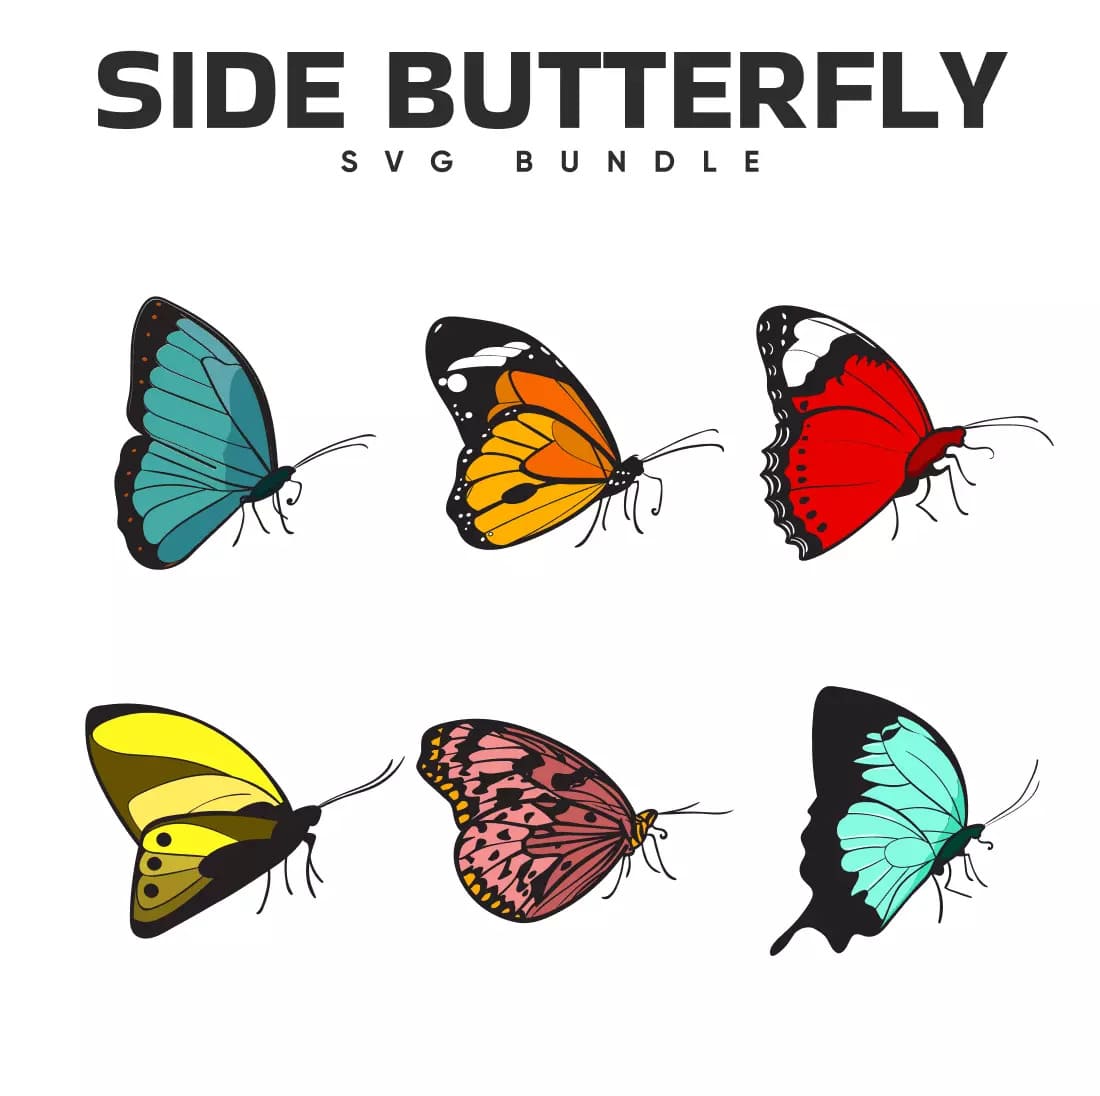 Group of butterflies with the words side butterfly svg bundle.